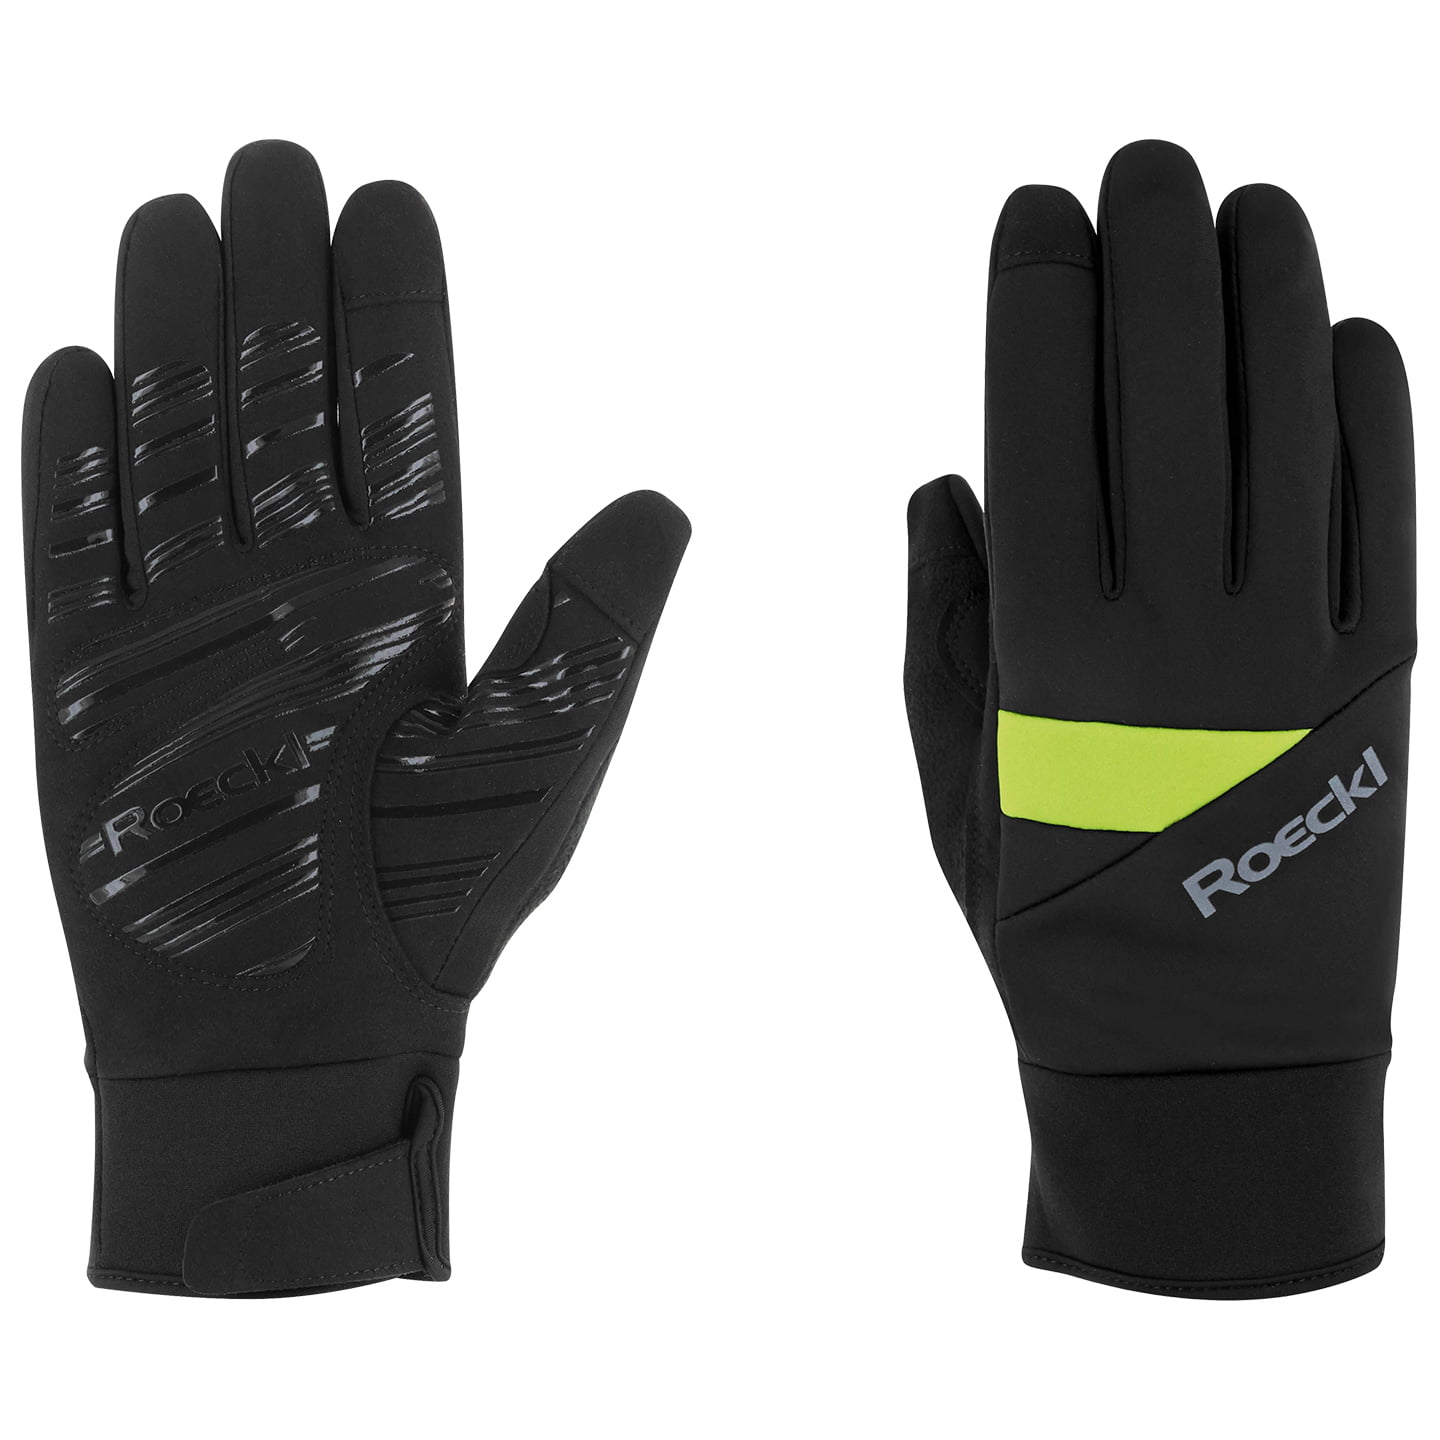 ROECKL Reichenthal Winter Gloves Winter Cycling Gloves, for men, size 9,5, Bike gloves, Cycling wear